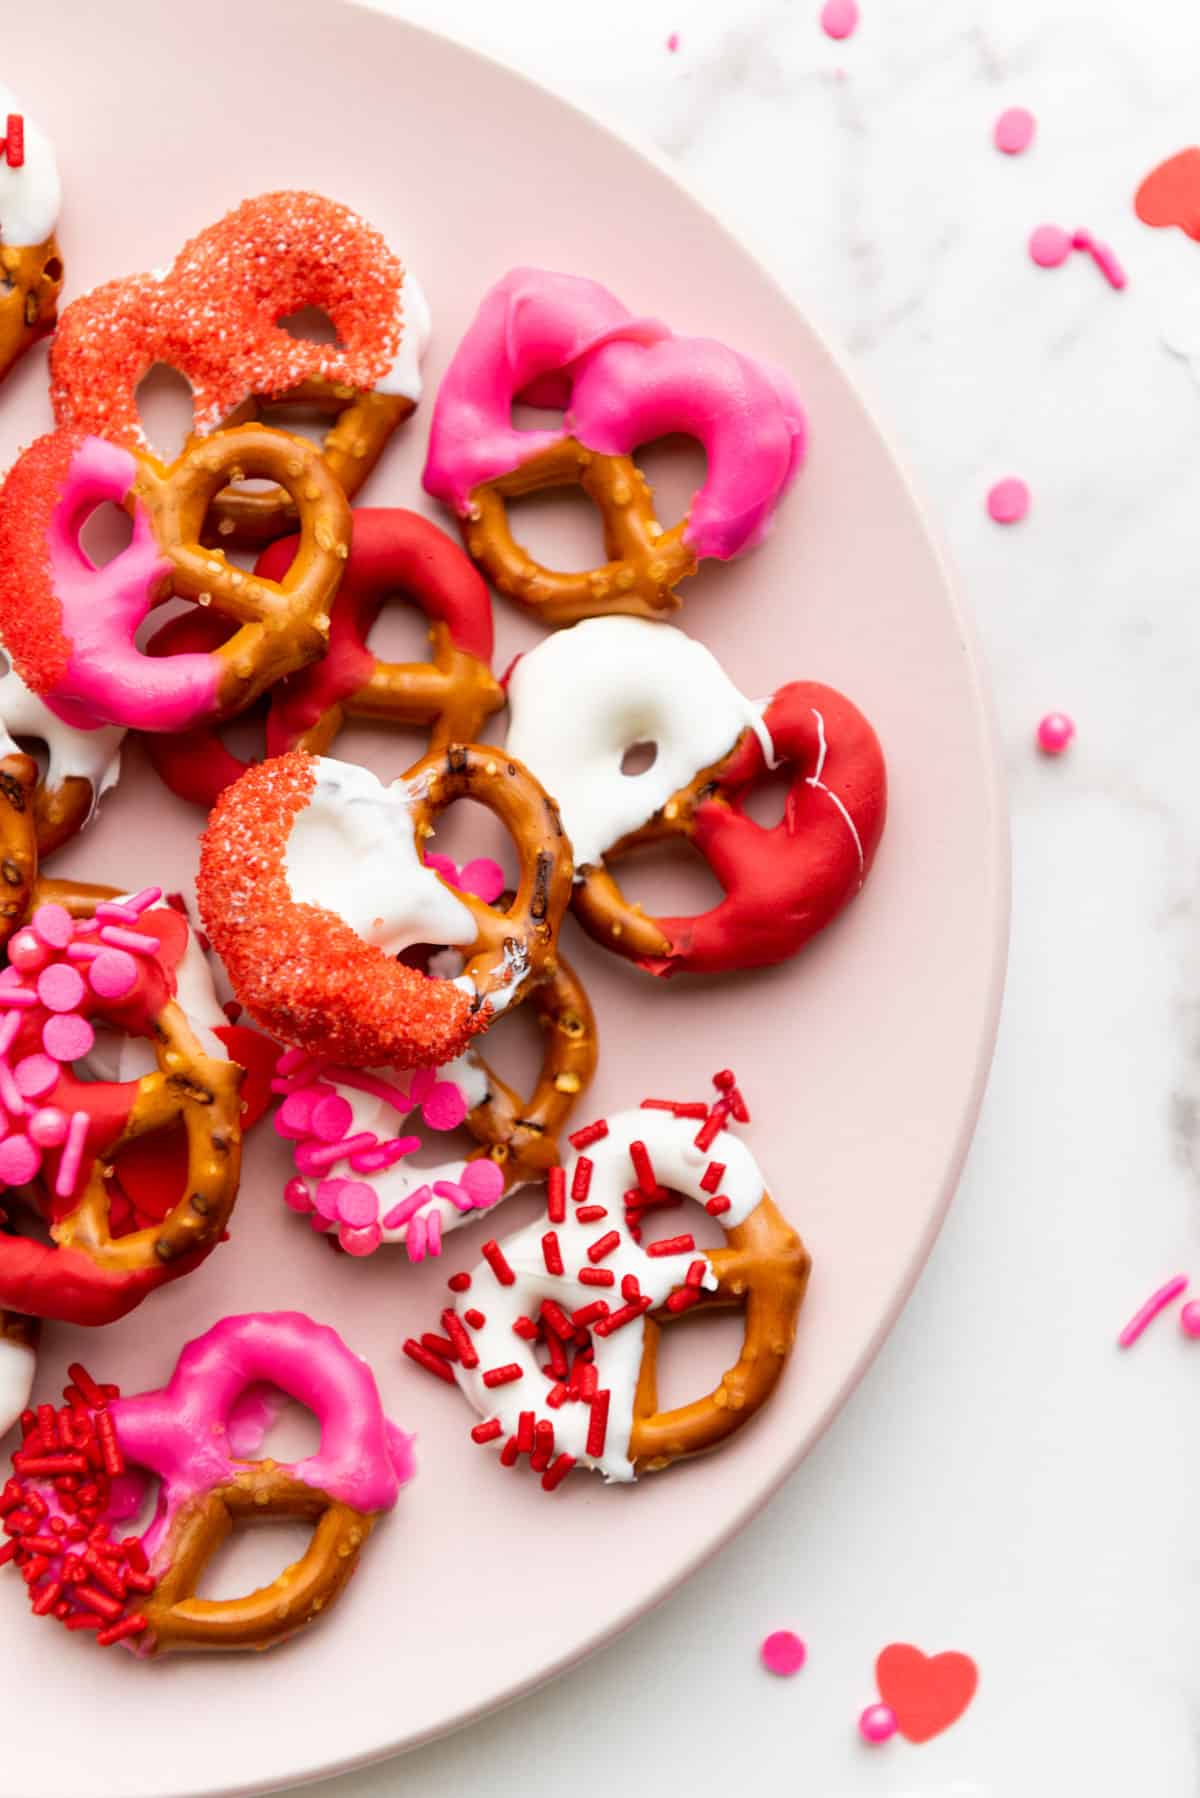 A close up of Valentine's Day pretzels coated in chocolate and sprinkles.